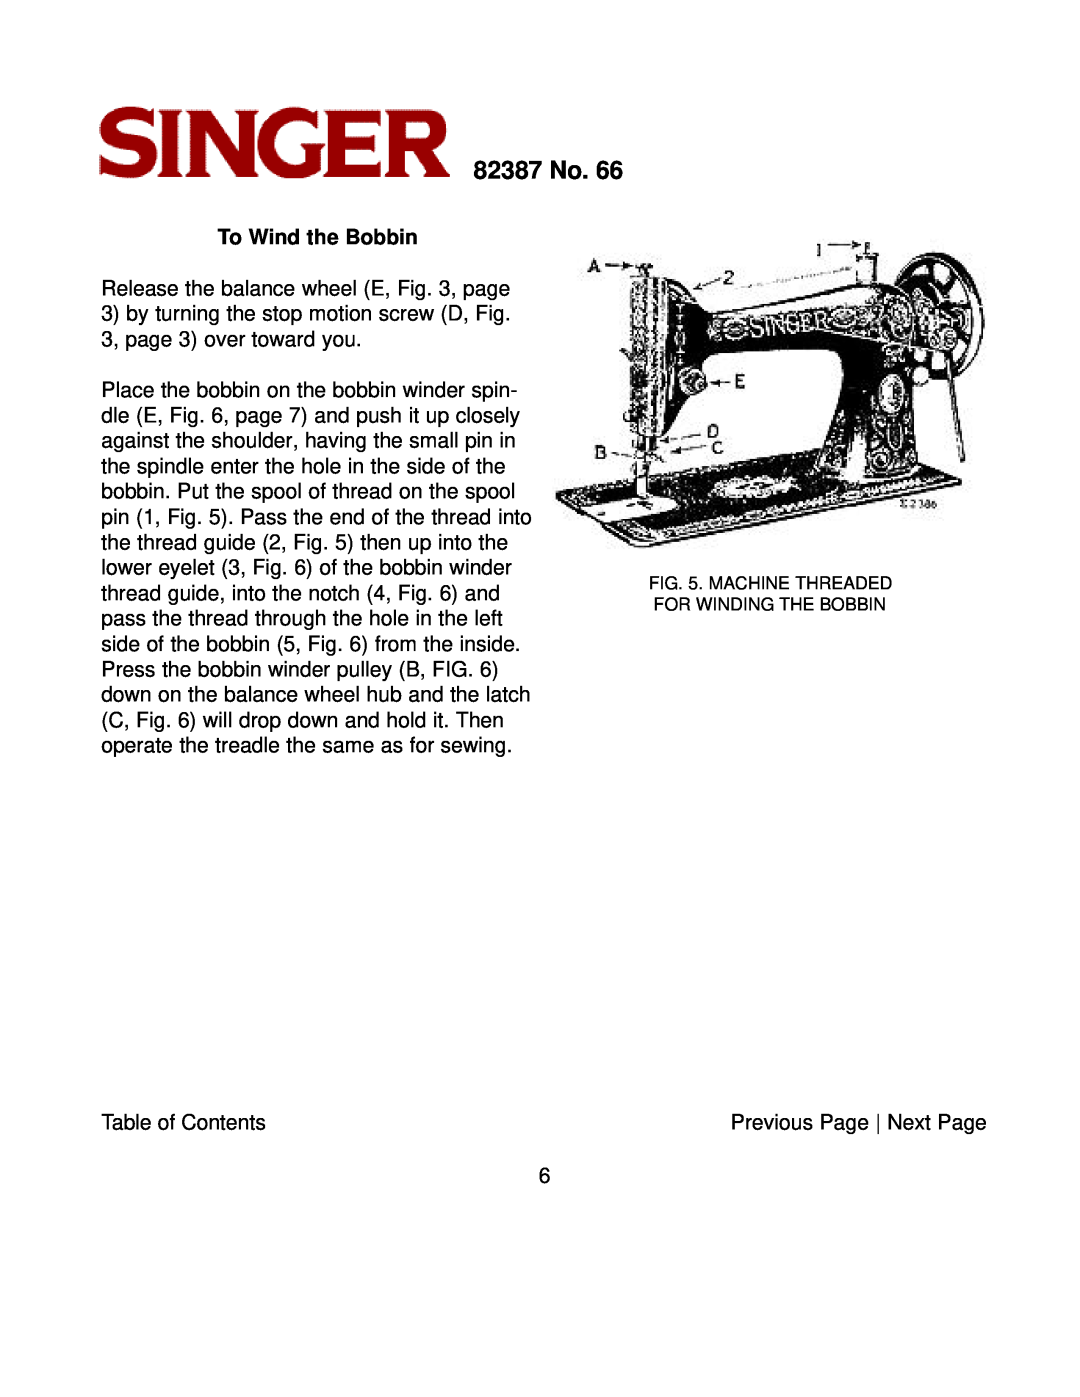 Singer instruction manual To Wind the Bobbin, 82387 No, Machine Threaded For Winding The Bobbin 